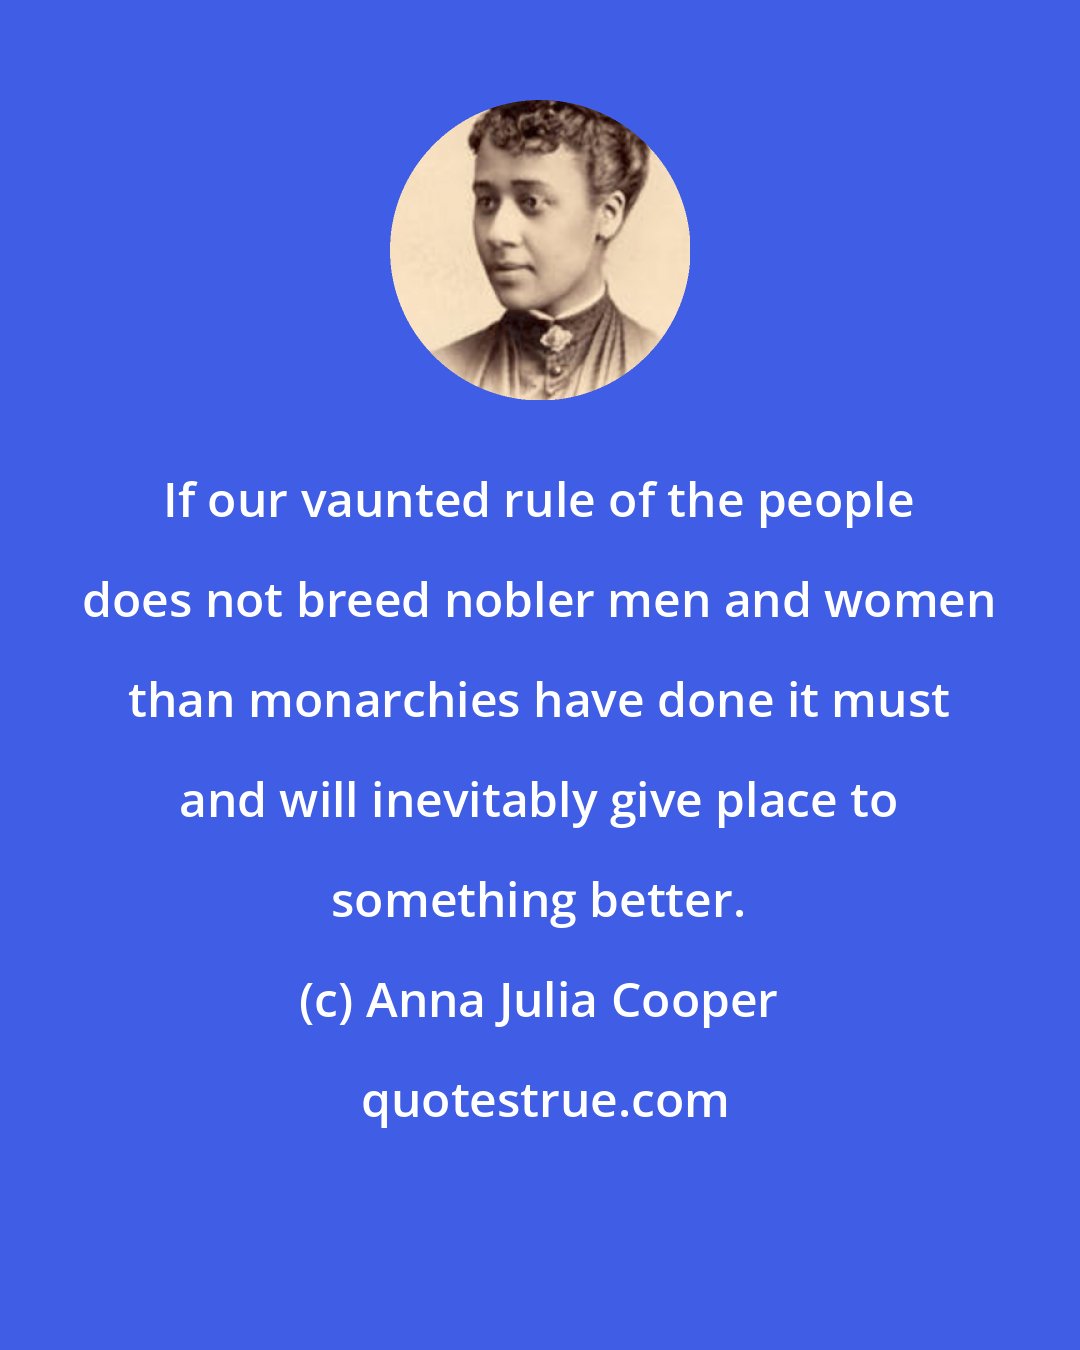 Anna Julia Cooper: If our vaunted rule of the people does not breed nobler men and women than monarchies have done it must and will inevitably give place to something better.